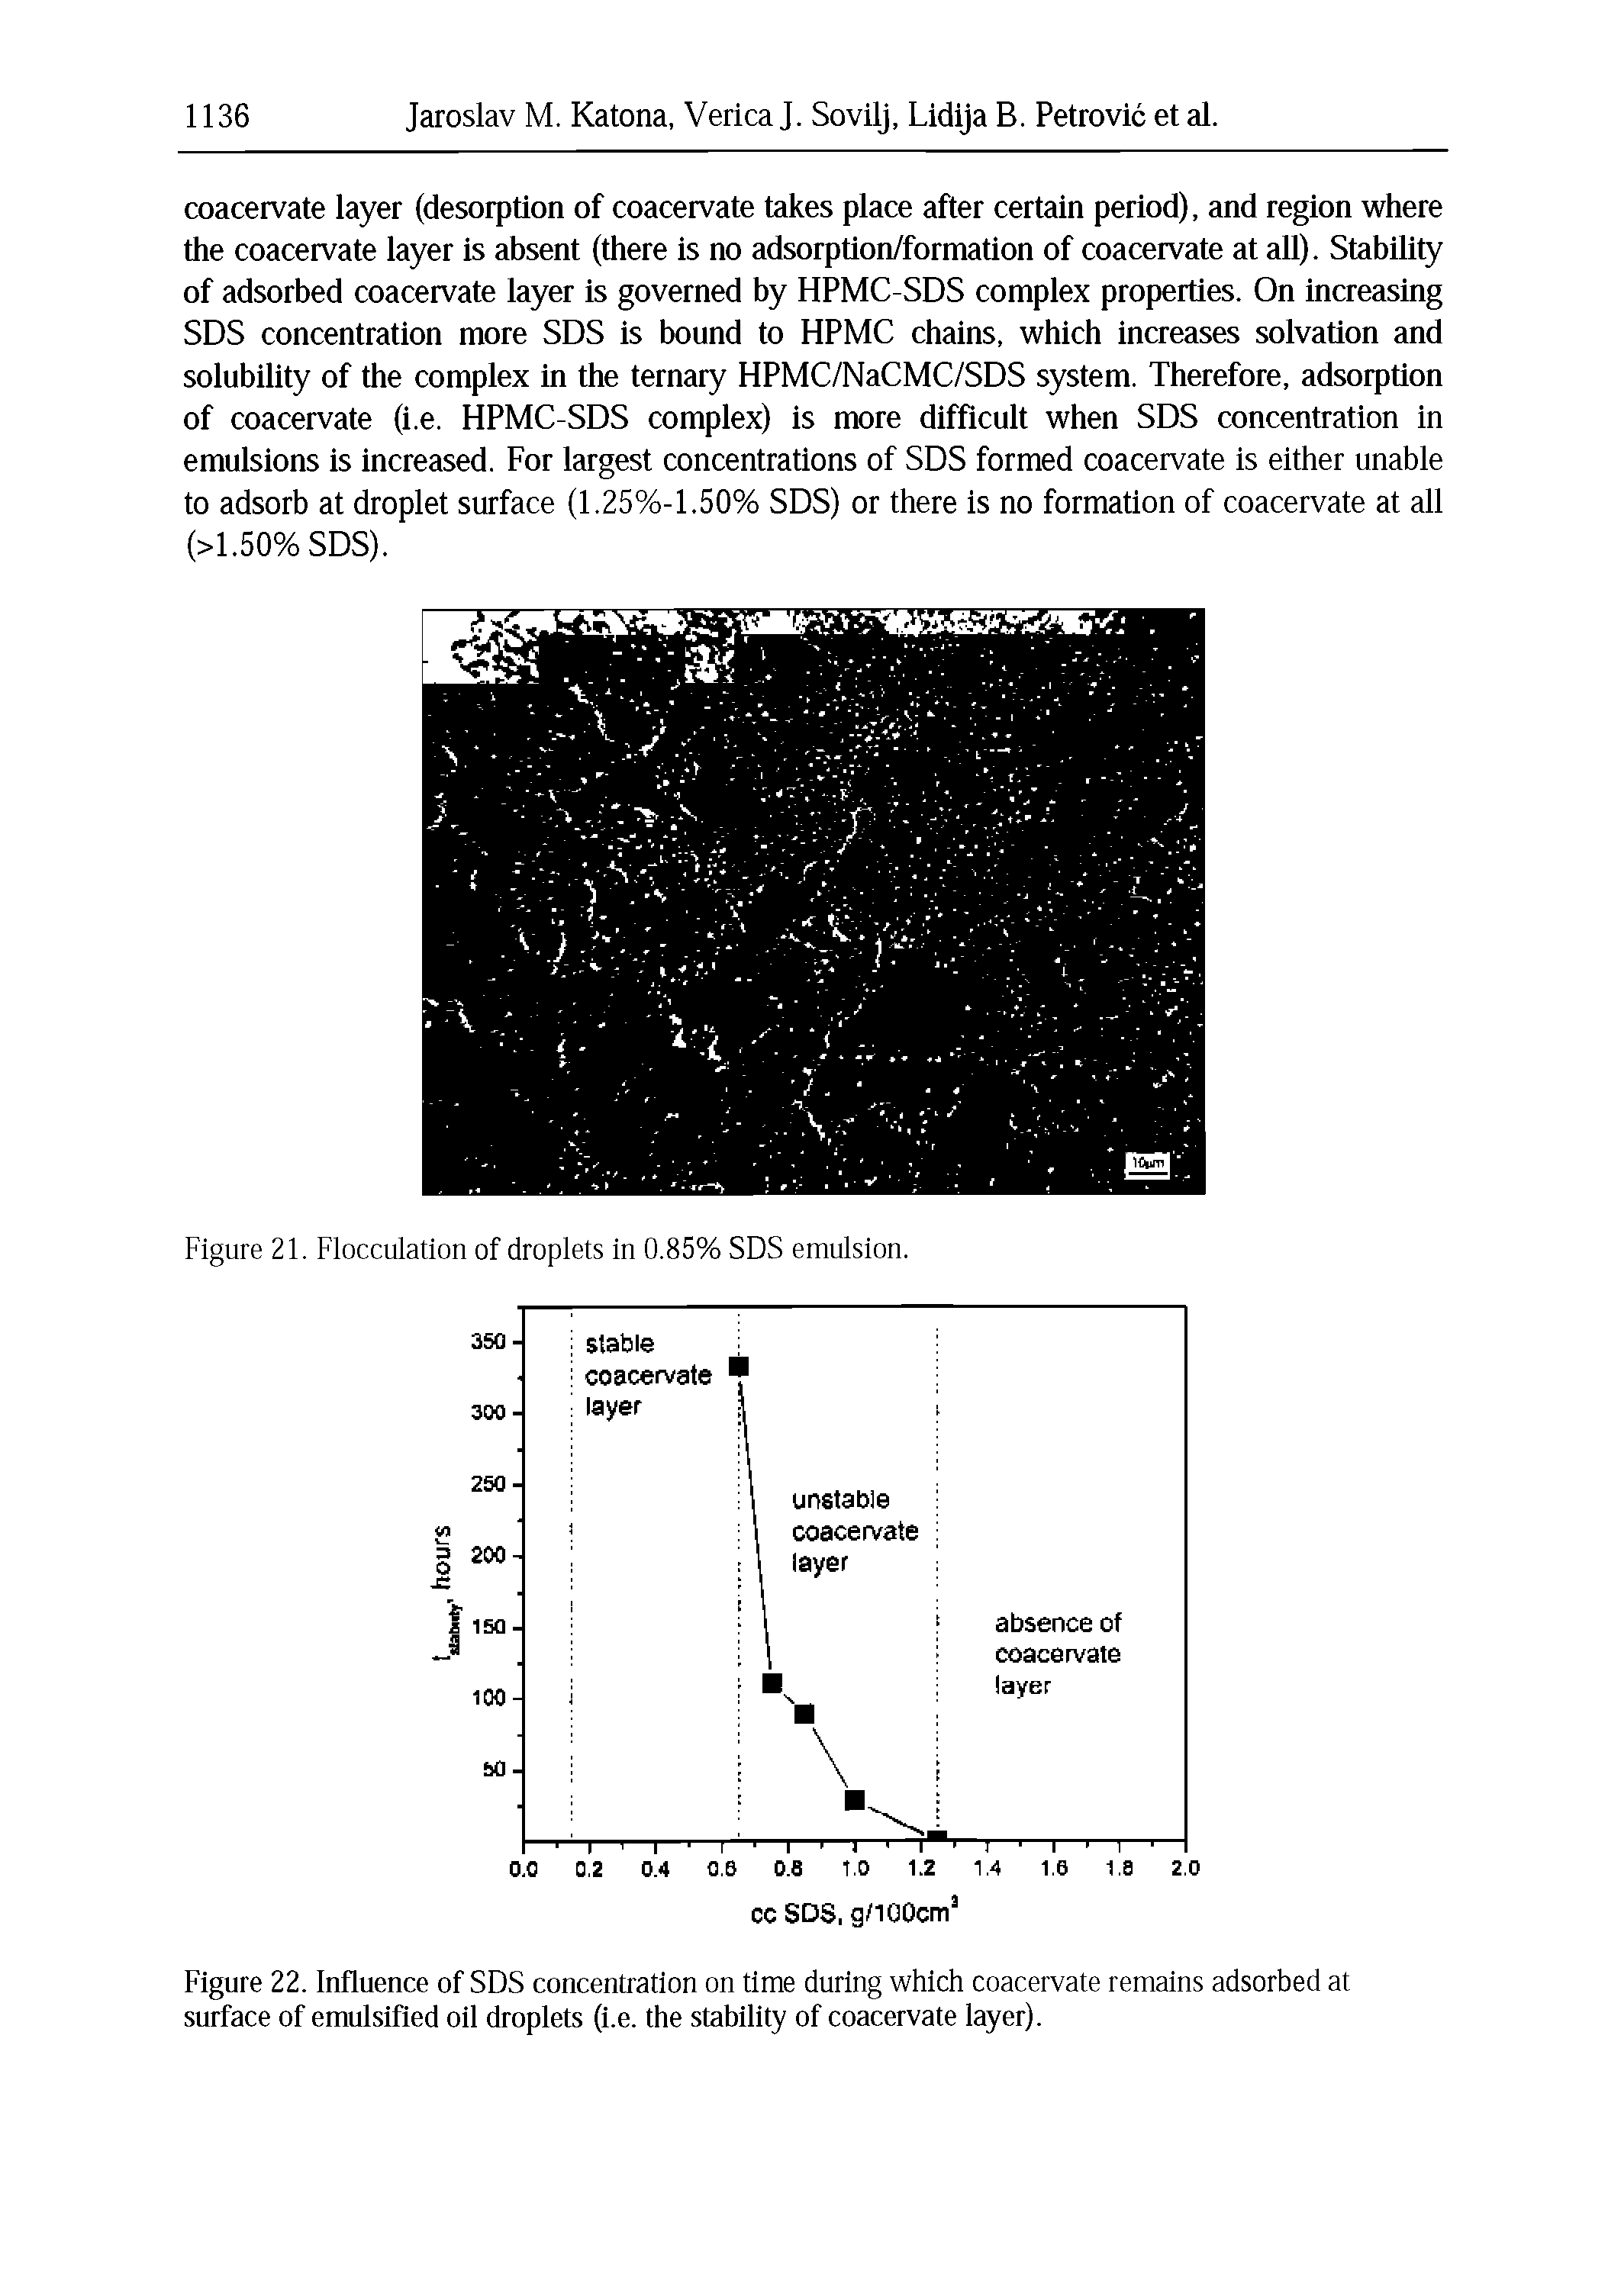 Figure 22. Influence of SDS concentration on time during which coacervate remains adsorbed at surface of emulsified oil droplets (i.e. the stability of coacervate layer).